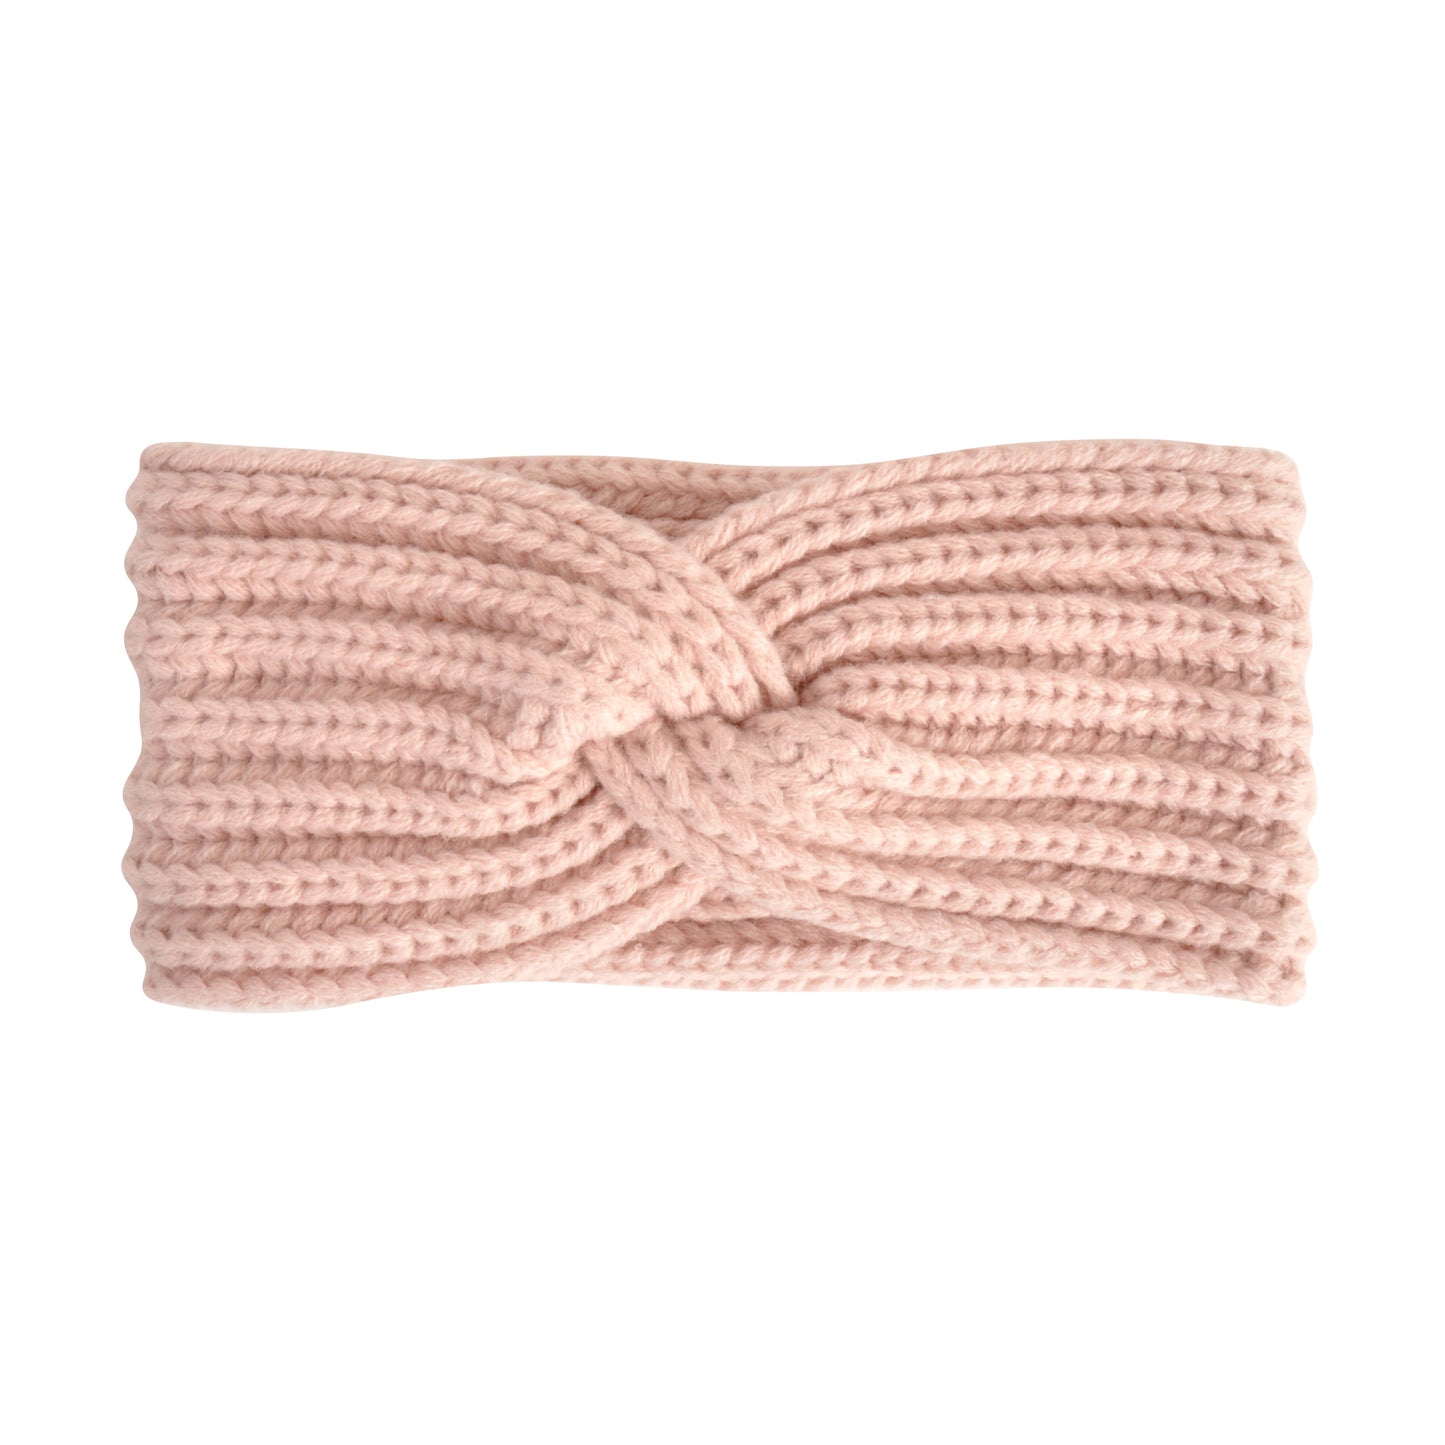 Knitted Headband - DUSTY PINK